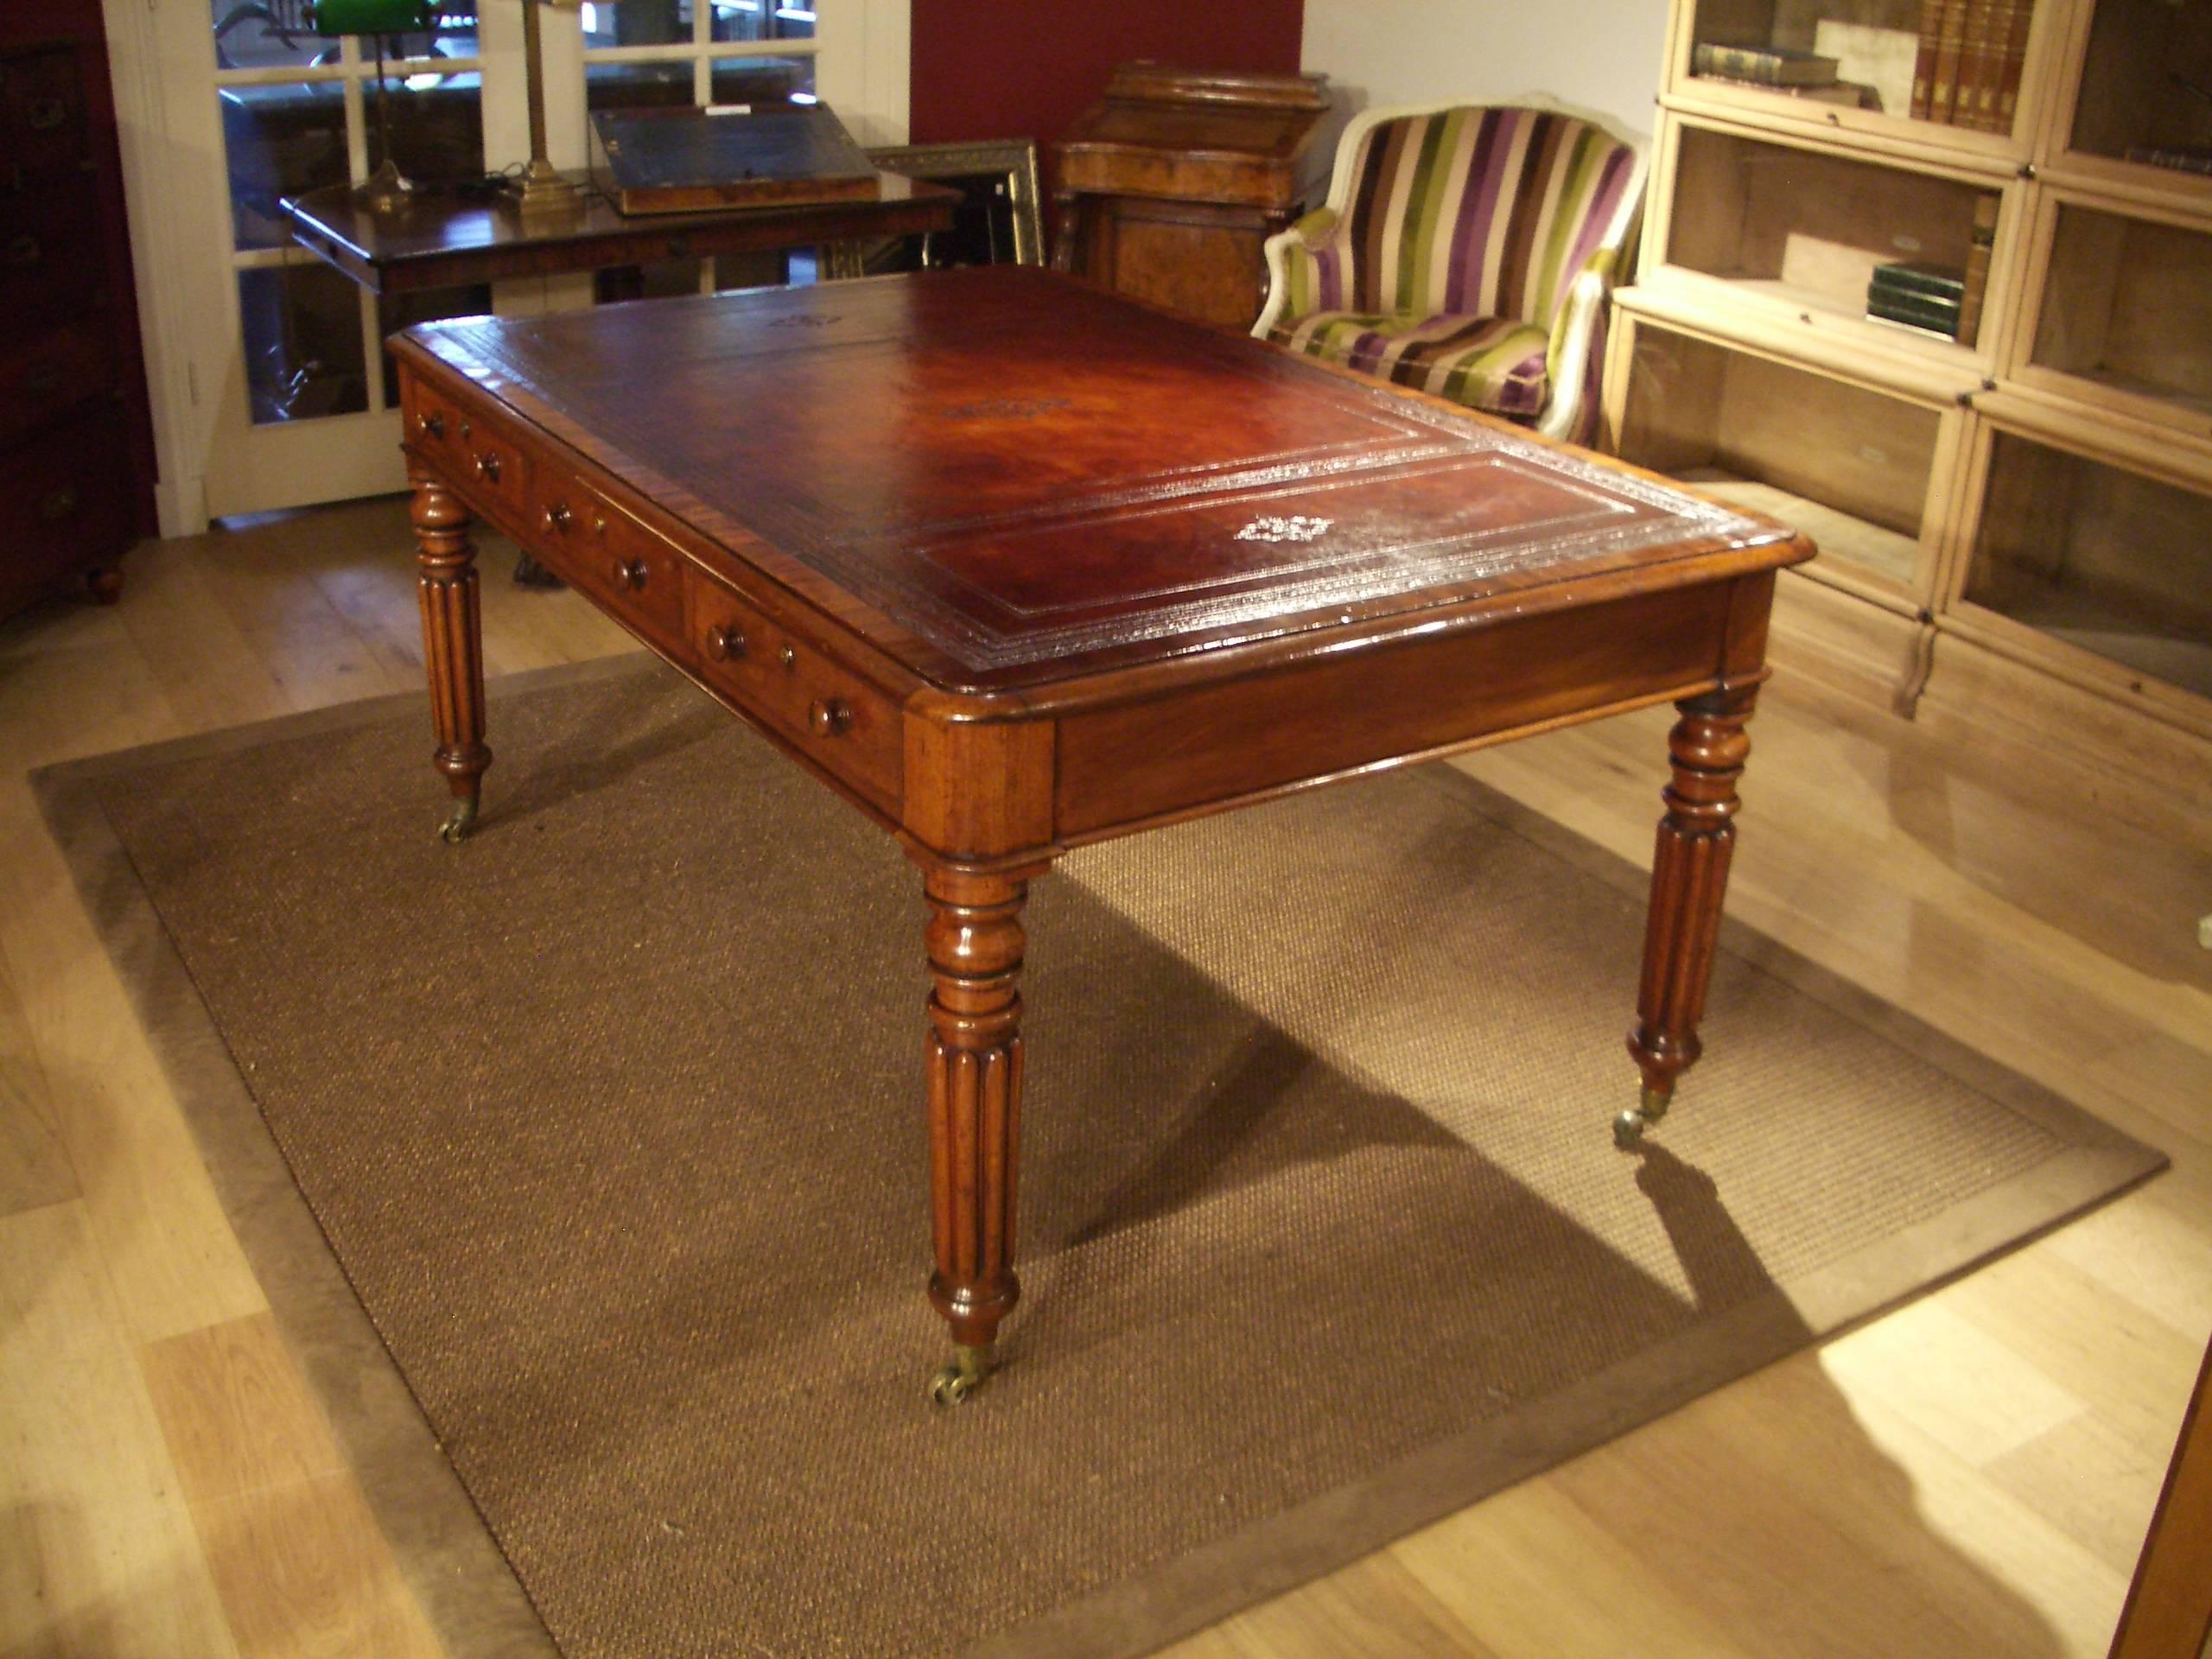 Beautiful antique William IV partners writing desk. The table has three drawers on both sides. Warm mahogany color. Leather is hand-colored brown leather with generous blind tooling. Crossbanded top. Table is in perfect condition. Nice and useful